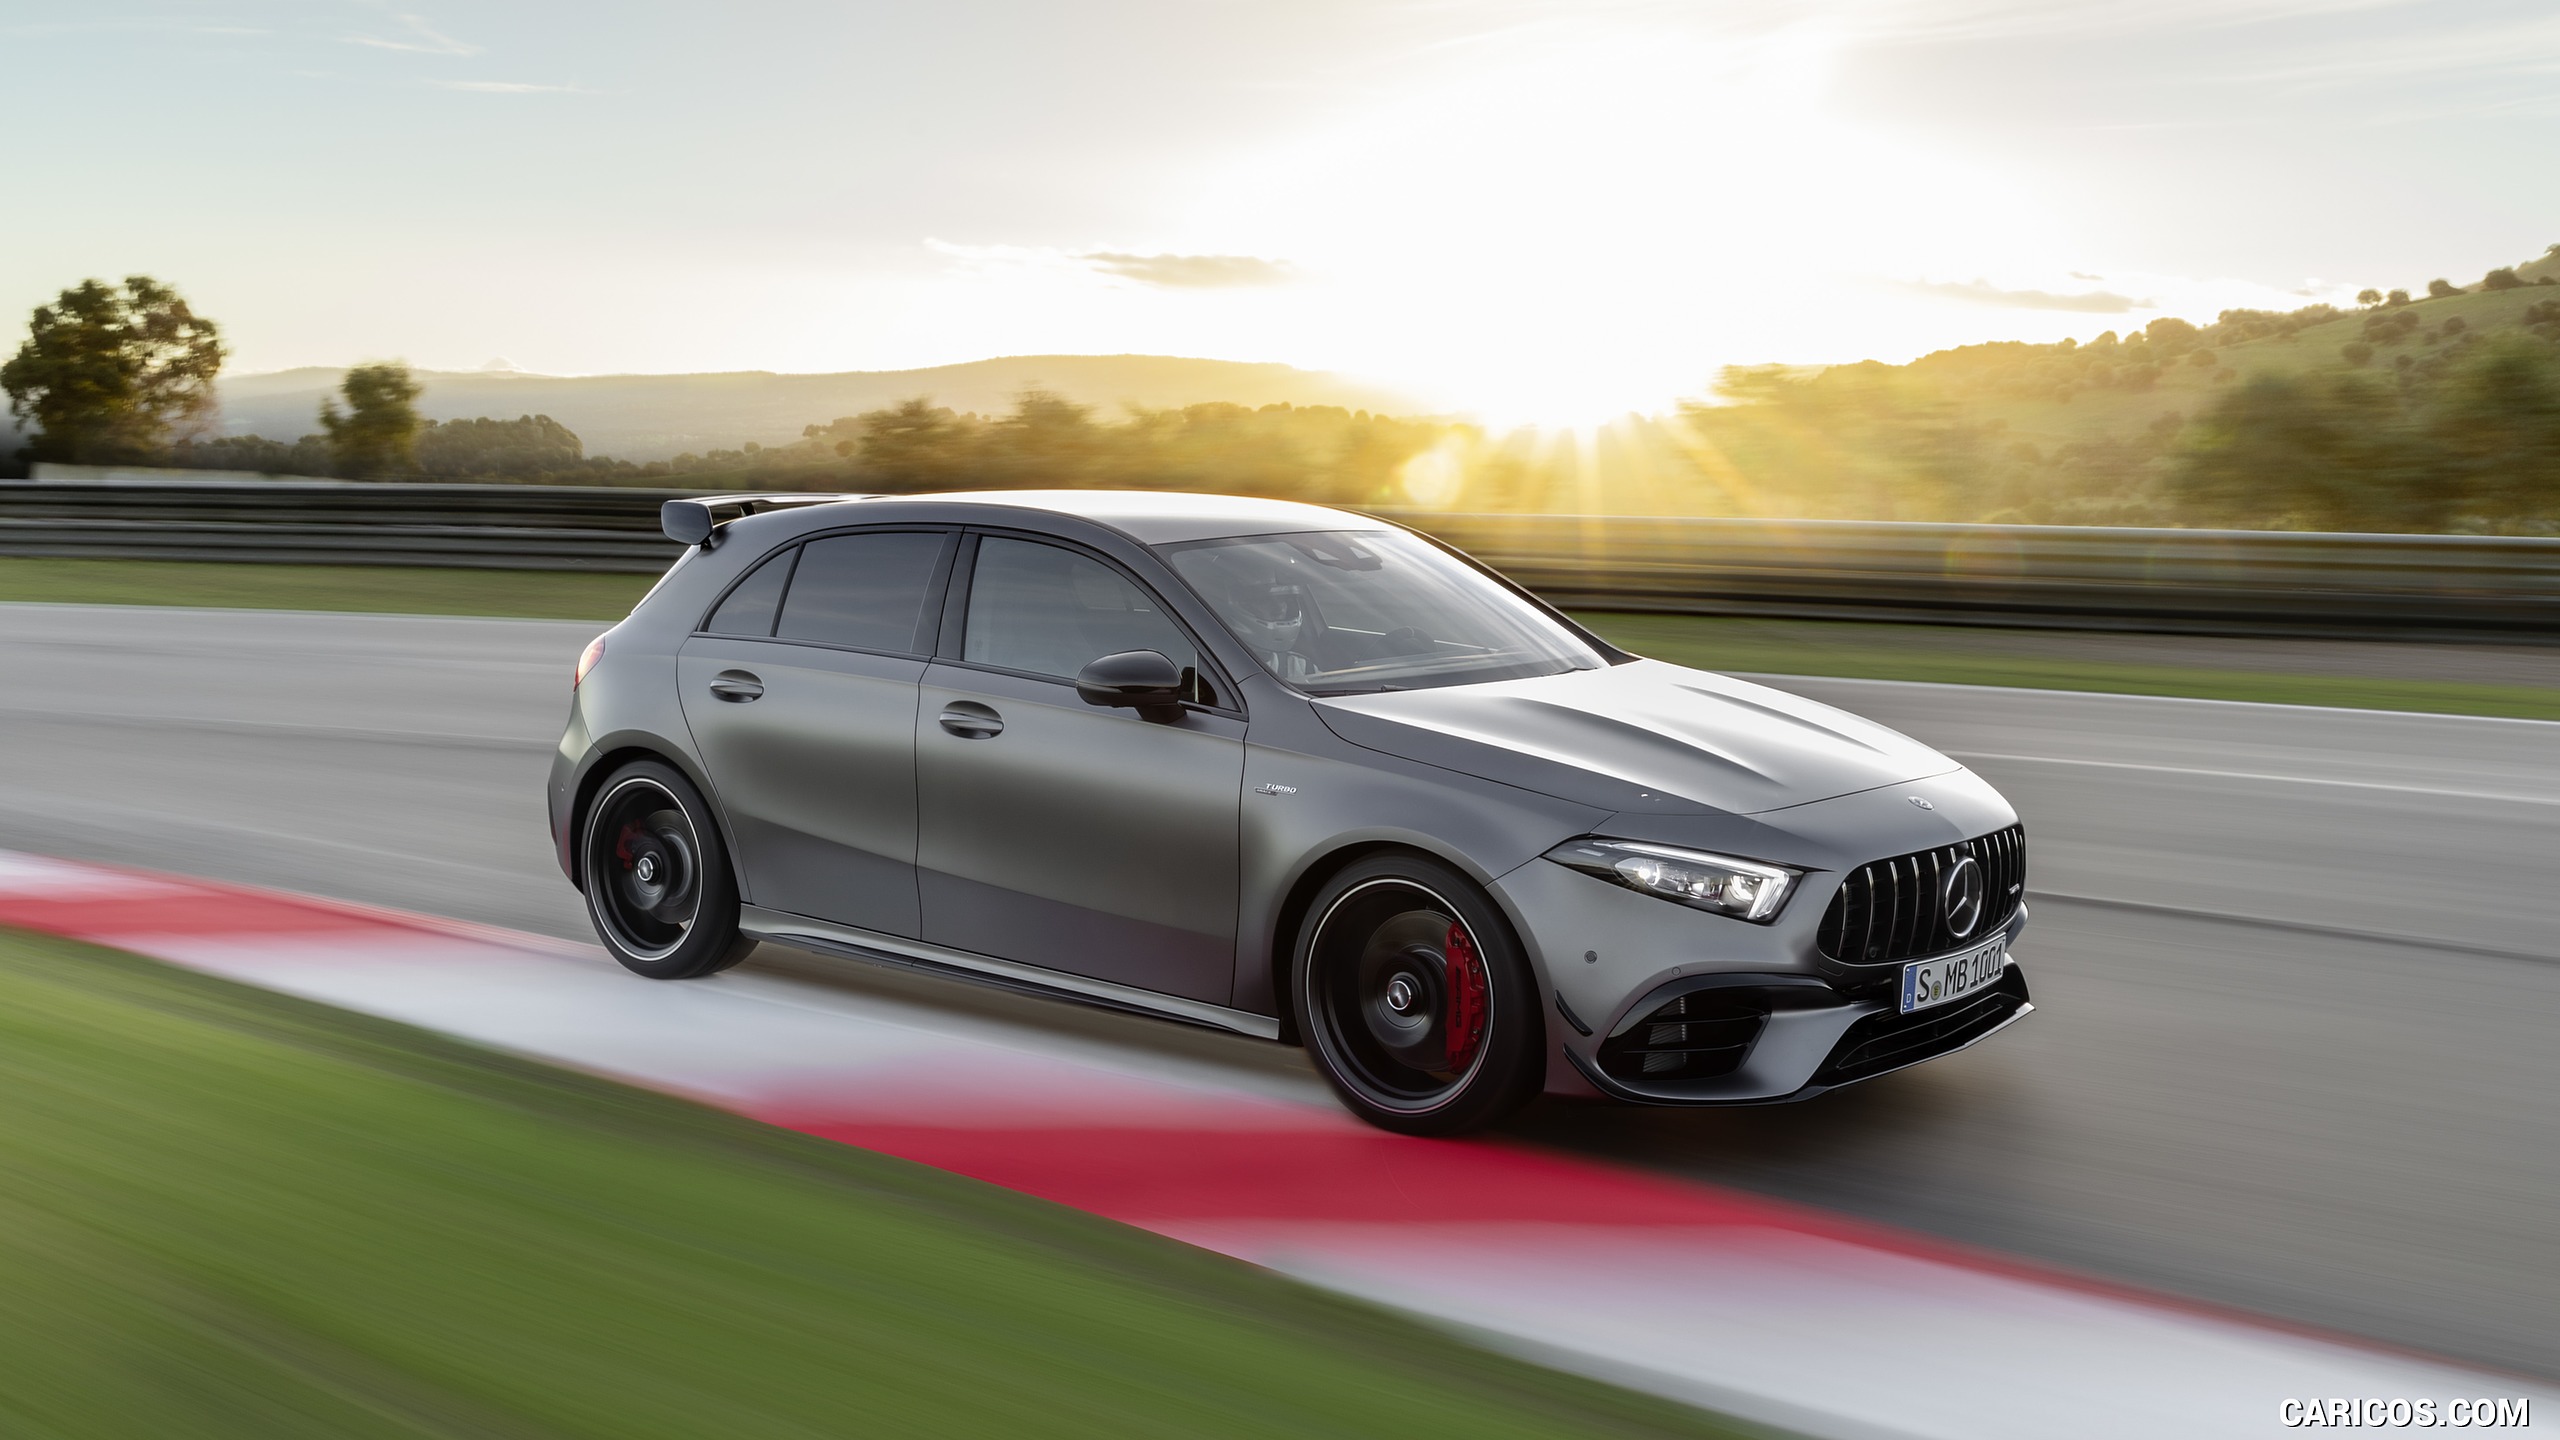 2020 Mercedes-AMG A 45 S 4MATIC+ - Front, #6 of 188